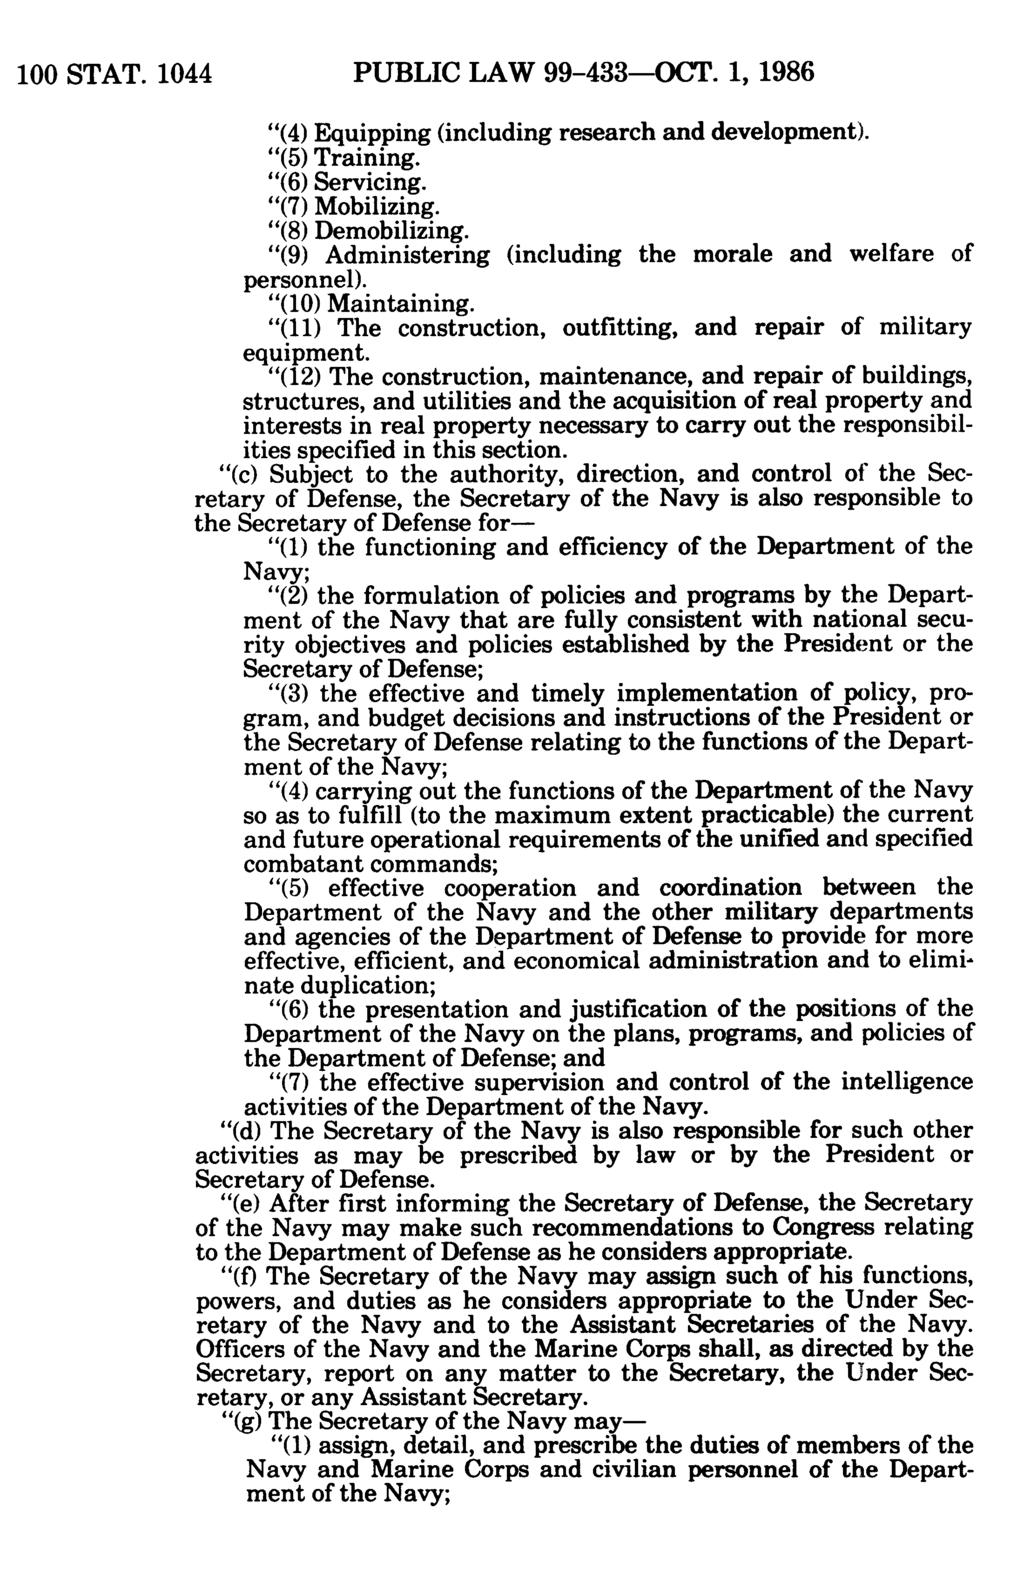 100 STAT. 1044 PUBLIC LAW 99-433-OCT. 1,1986 (4) Equipping (including research and development). (5) Training. (6) Servicing. (7) Mobilizing. (8) Demobilizing.